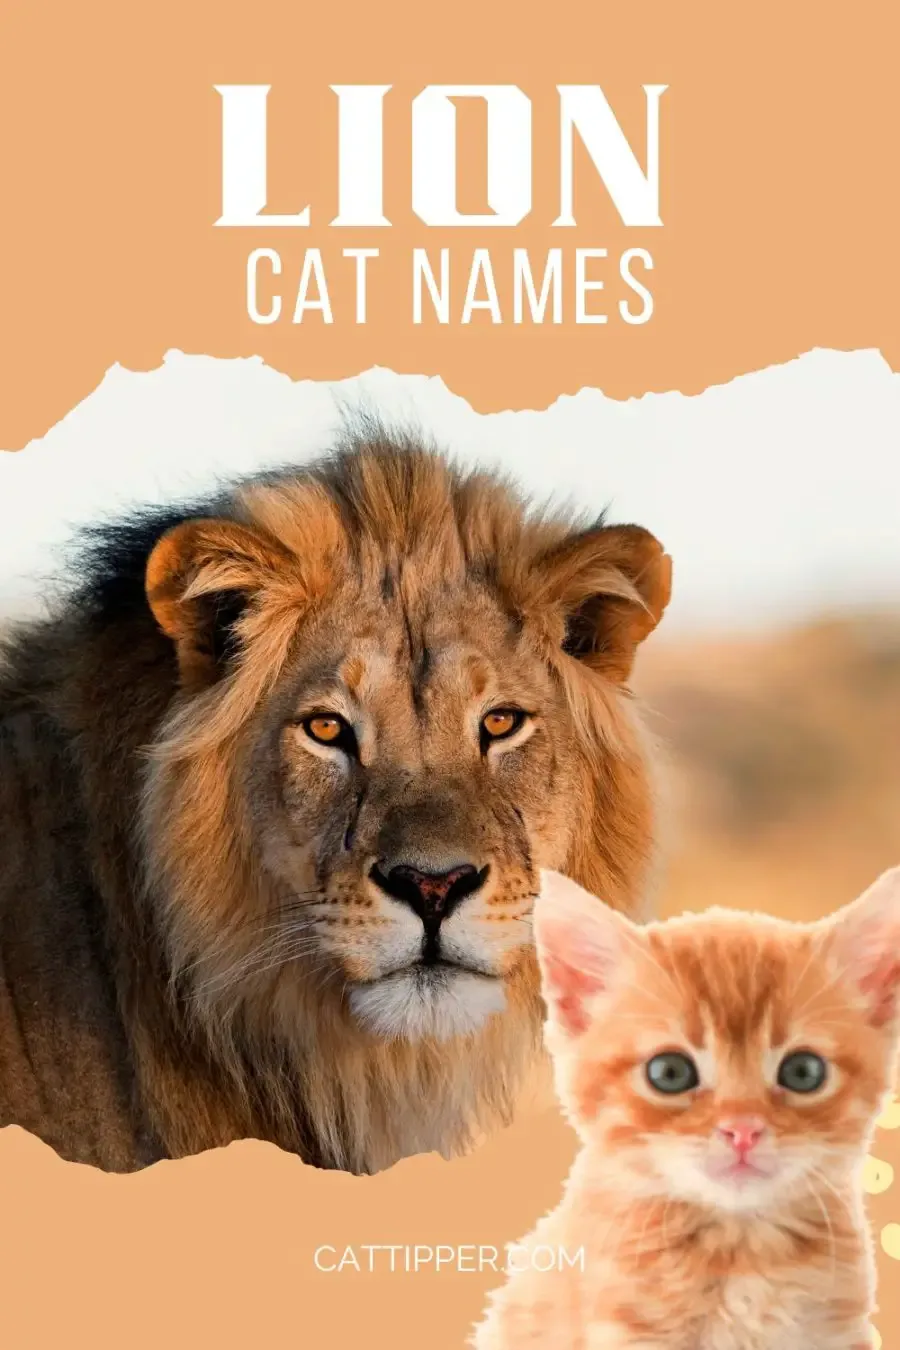 lion cat names; photo of lion and kitten